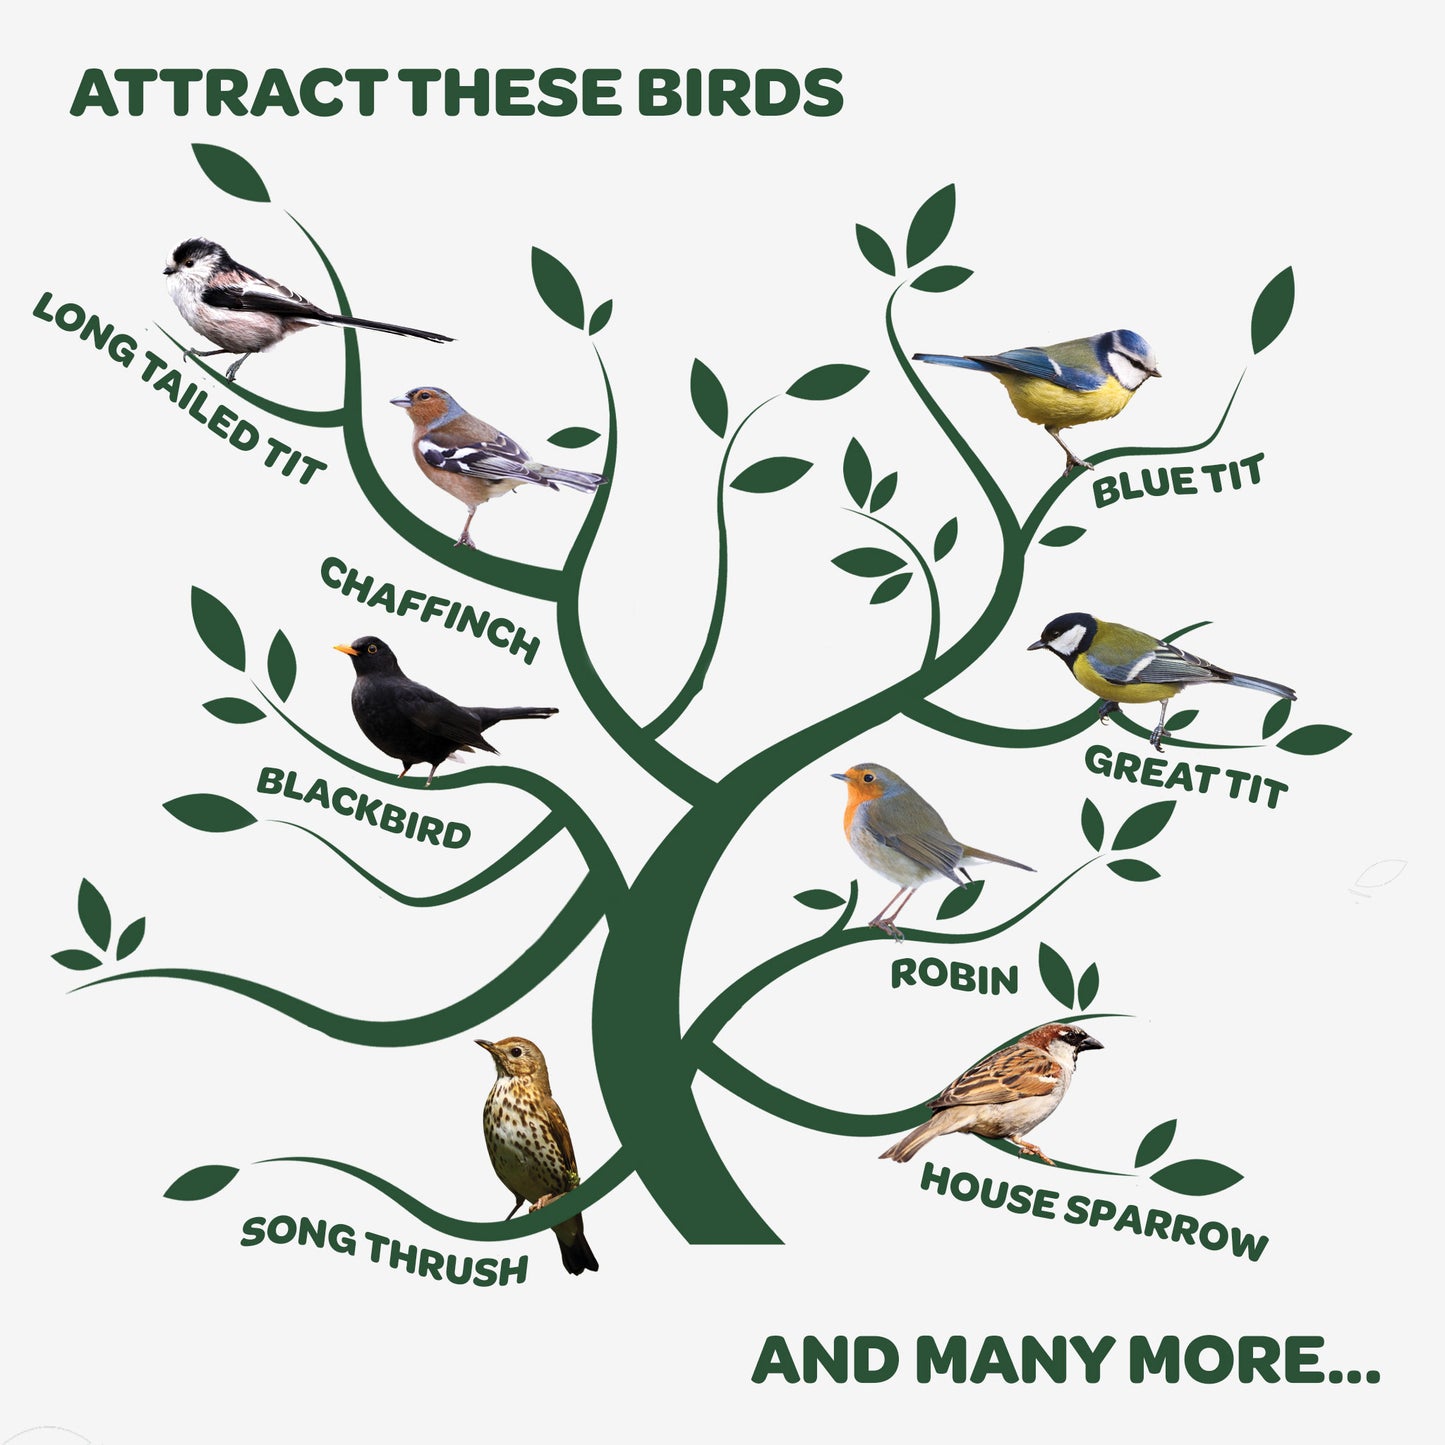 Peckish complete attracts these birds infographic